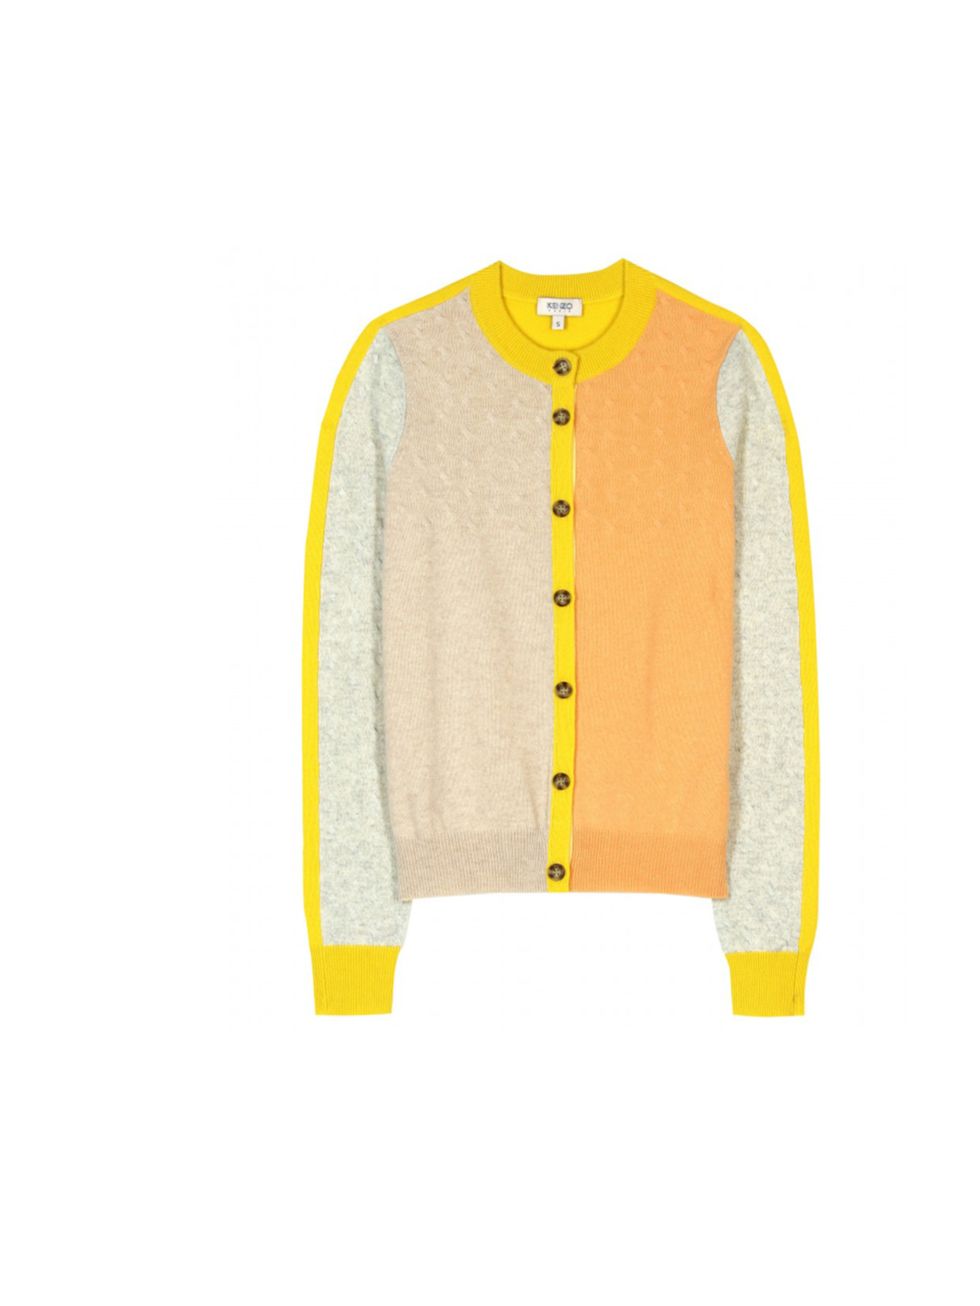 <p>Kenzo colour-block cashmere cardigan, £414, at Mytheresa</p><p><a href="http://shopping.elleuk.com/browse?fts=kenzo+cashmere+cardigan">BUY NOW</a></p>